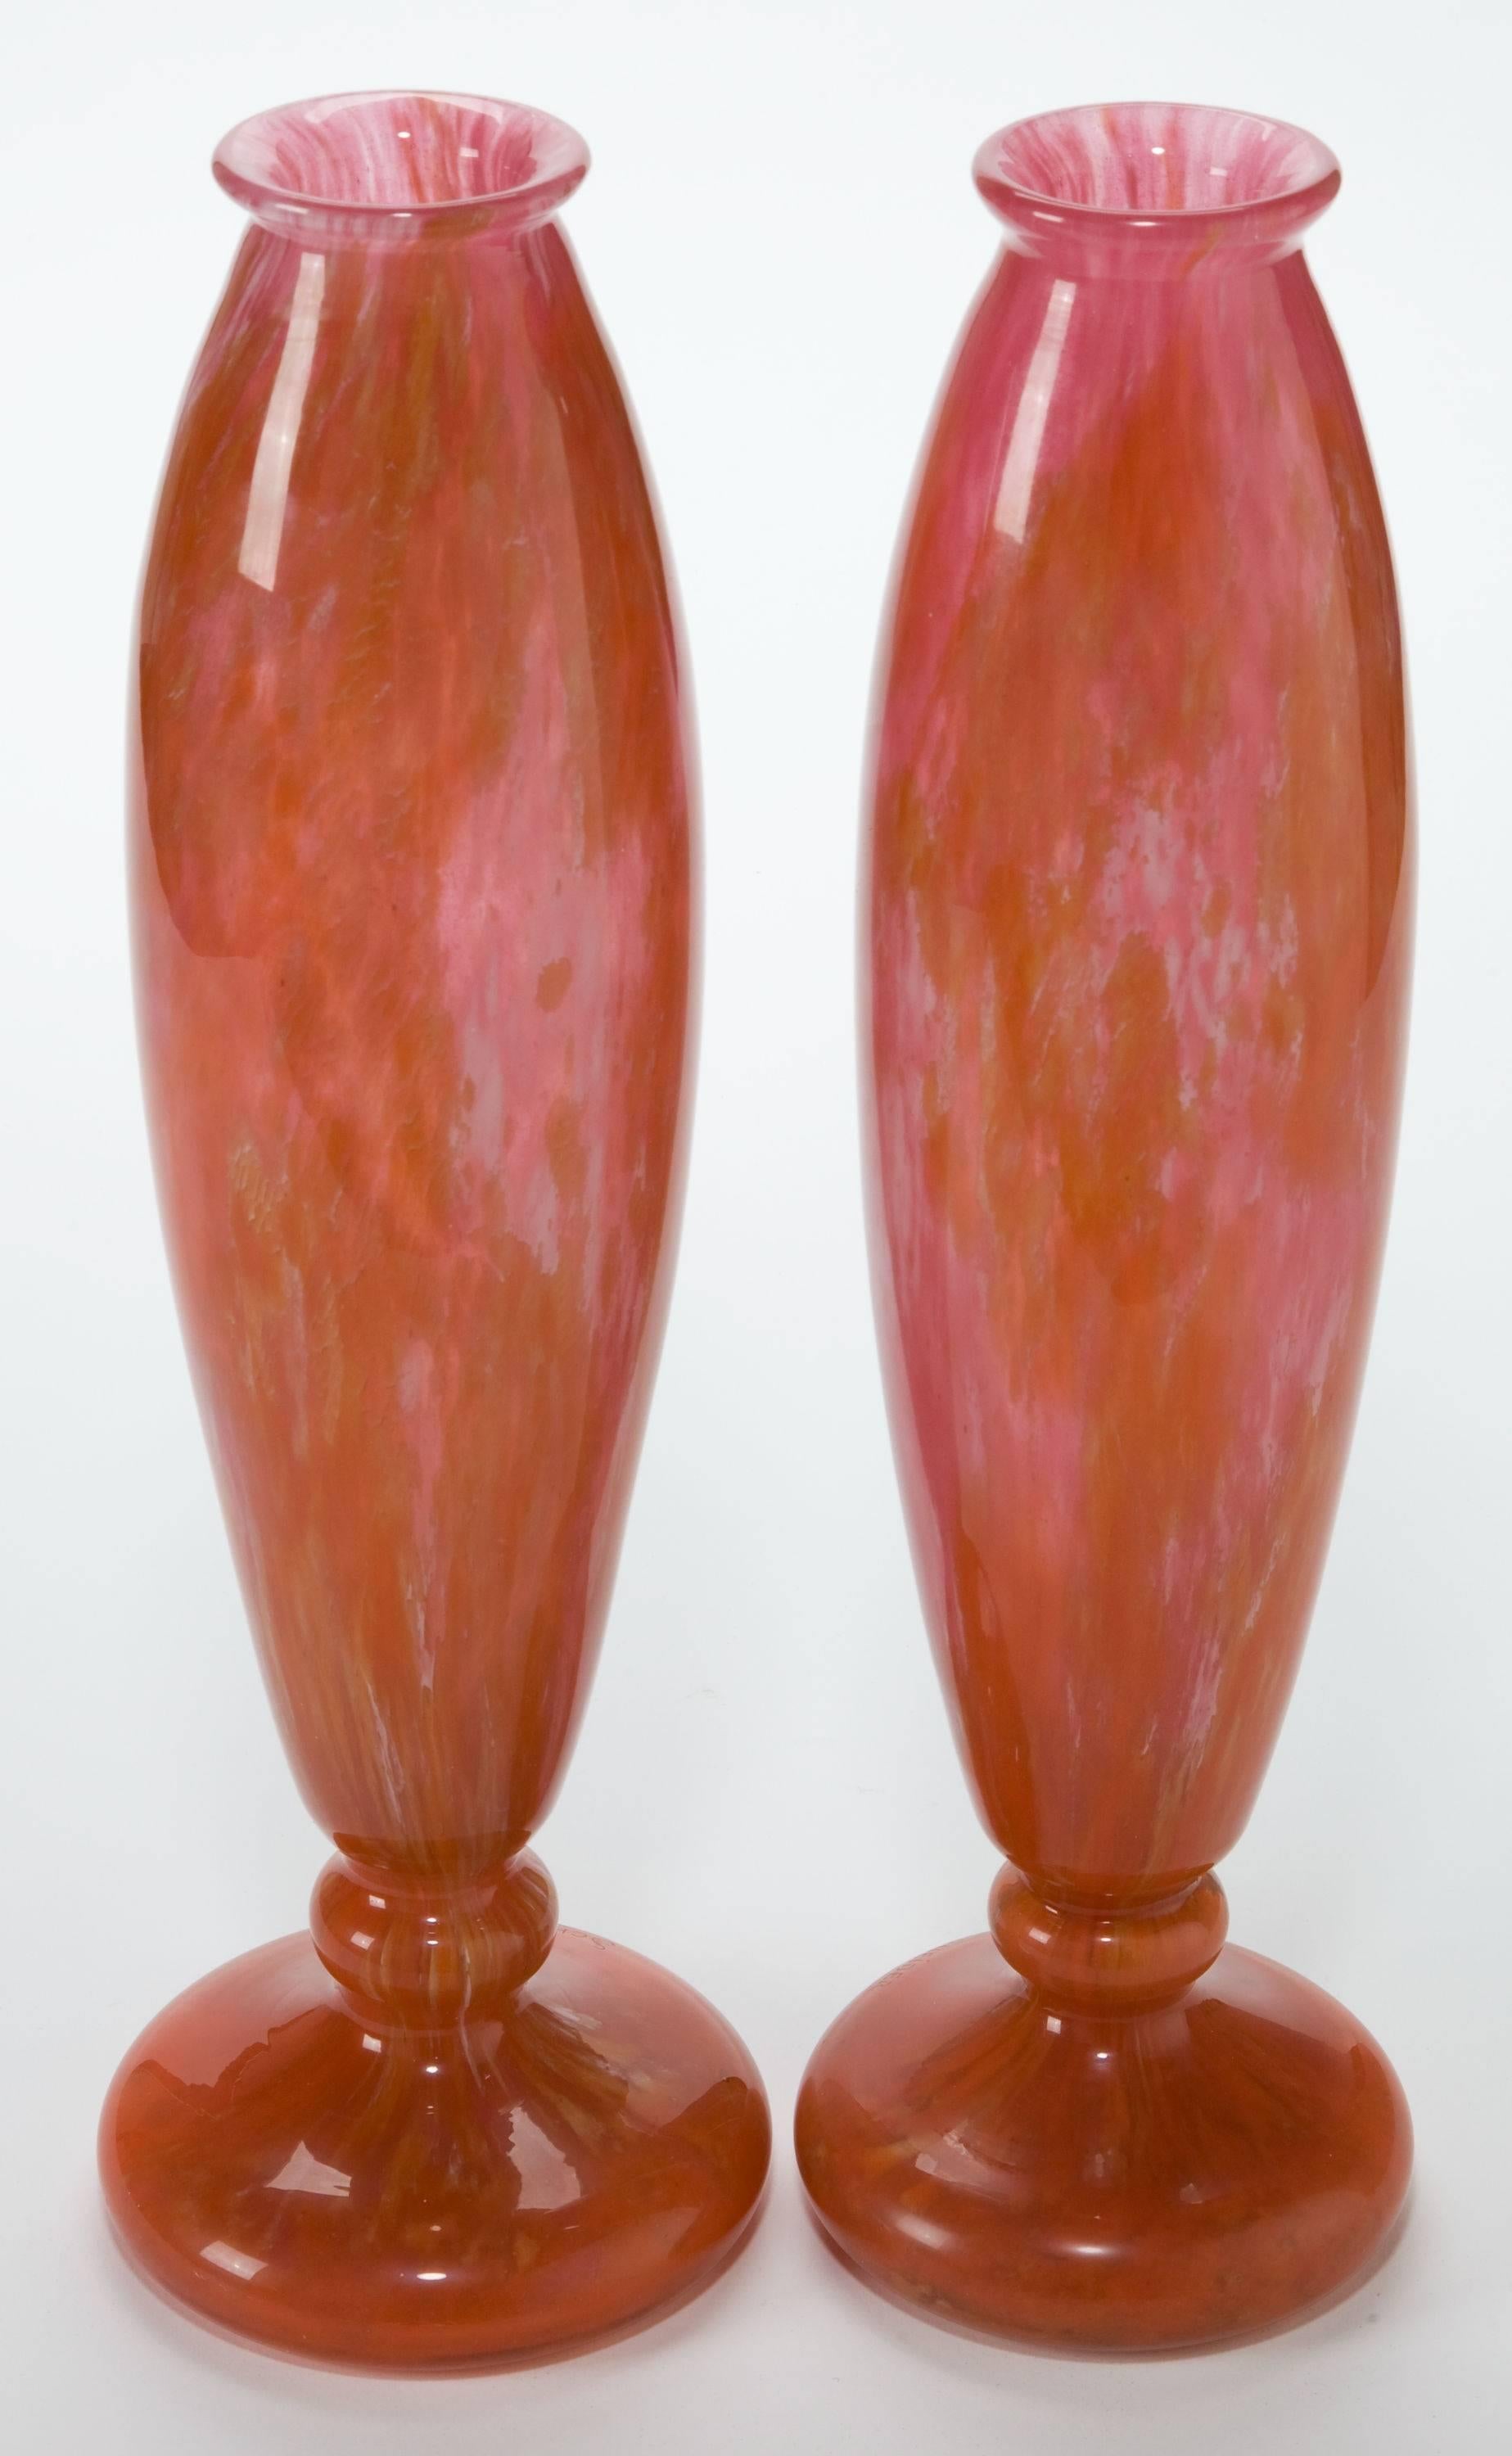 Pair of Schneider, Le Verre Francais glass vases, E´pinay-sur-Seine, France, circa 1925. Marks: SCHNEIDER. Measures: 16-1/4 inches high. (Total: Two items).

These vases are large and decorative and compliment contemporary Art Deco and Nouveau